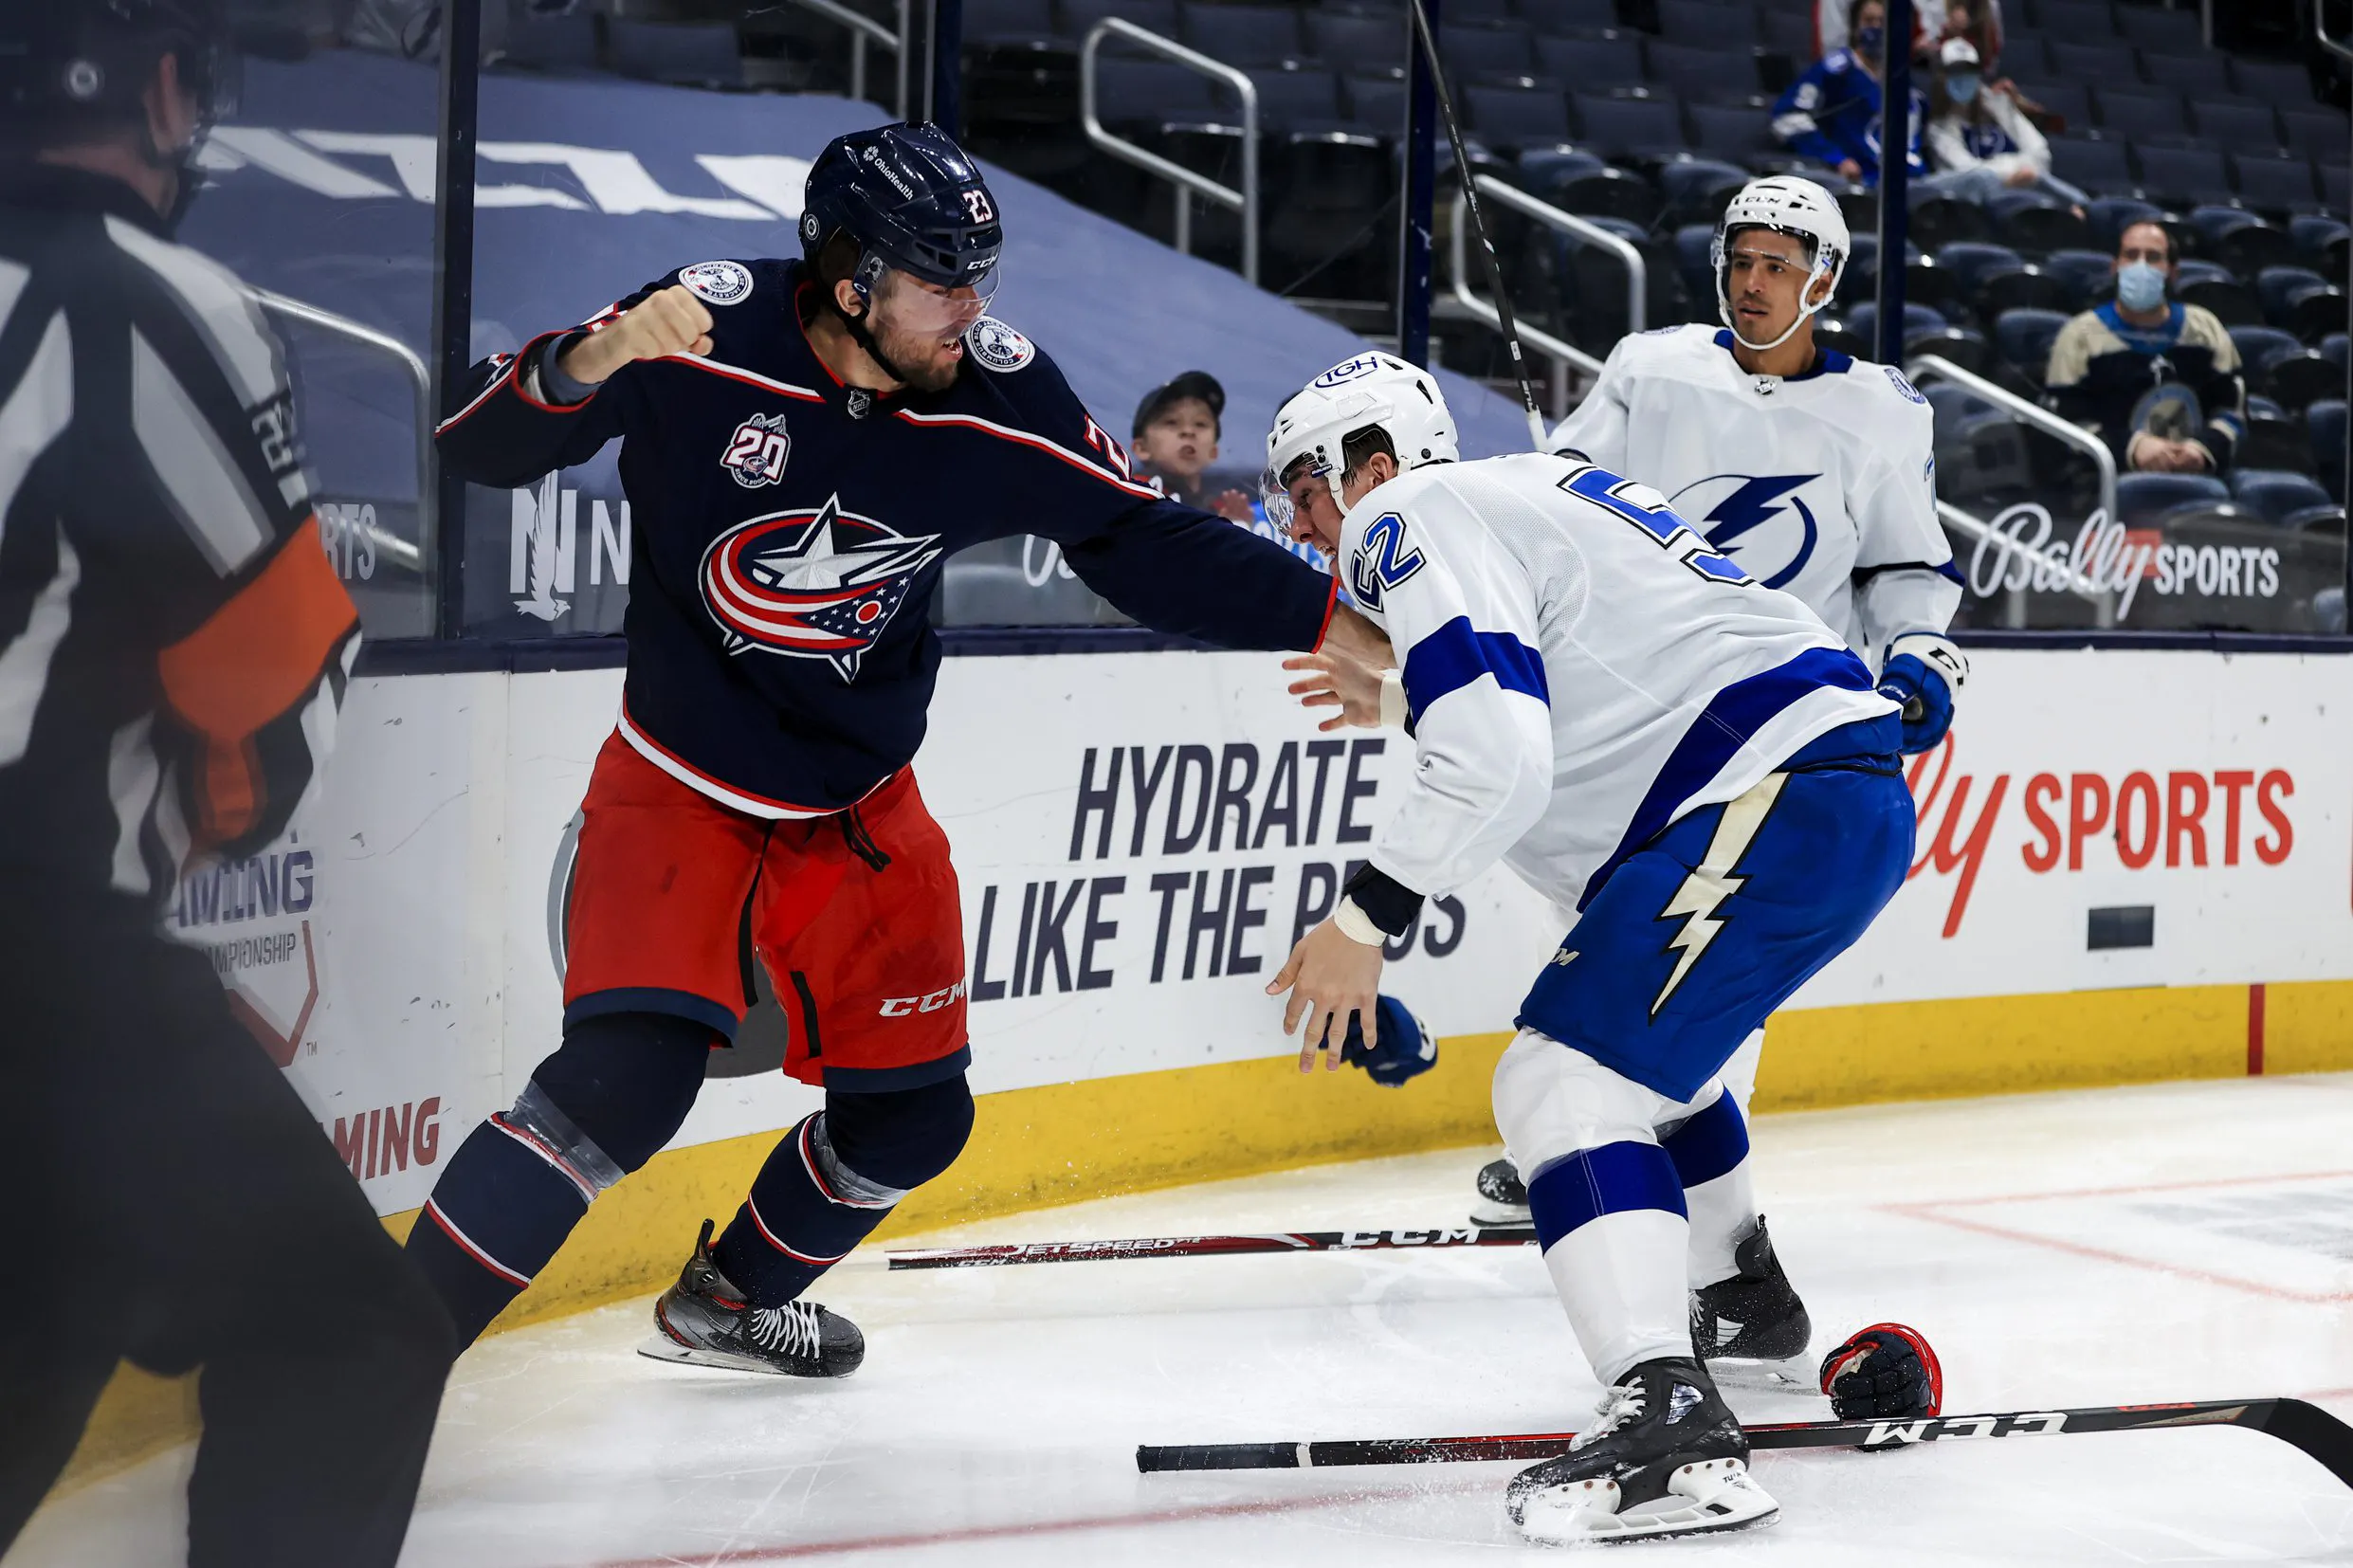 Stefan Matteau returns to Columbus Blue Jackets on professional tryout agreement